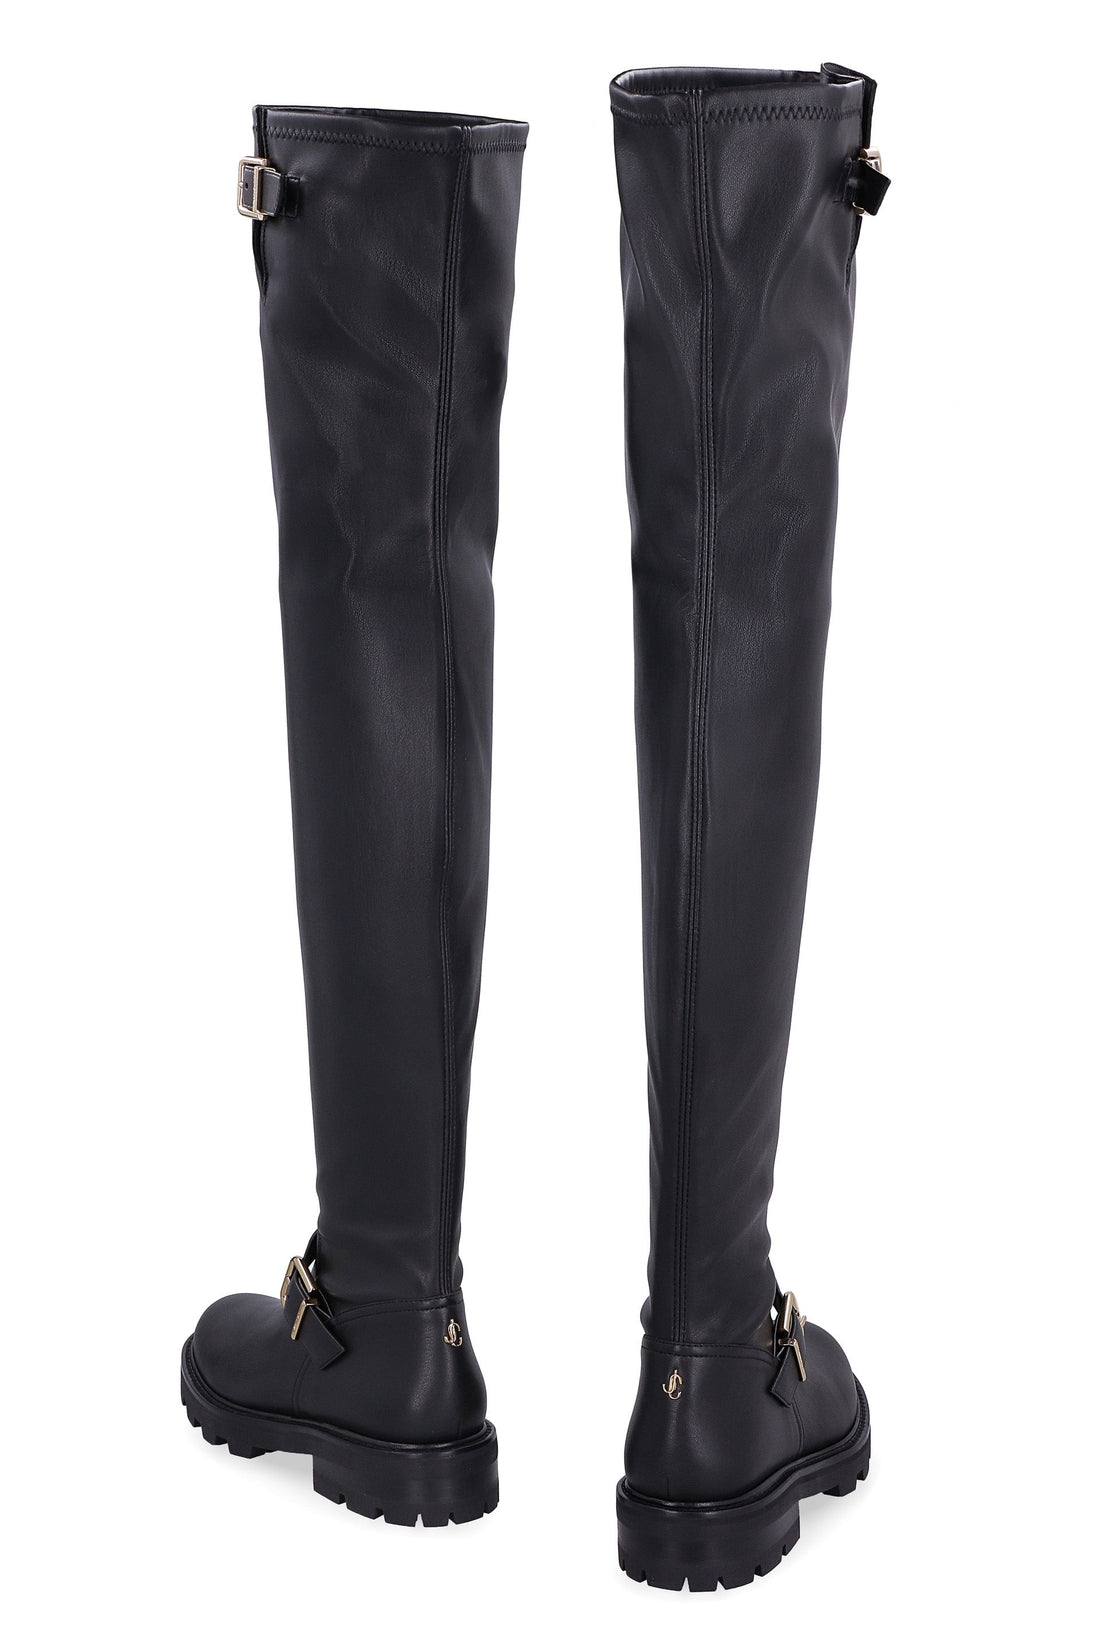 Jimmy Choo-OUTLET-SALE-Biker over-the-knee boots-ARCHIVIST